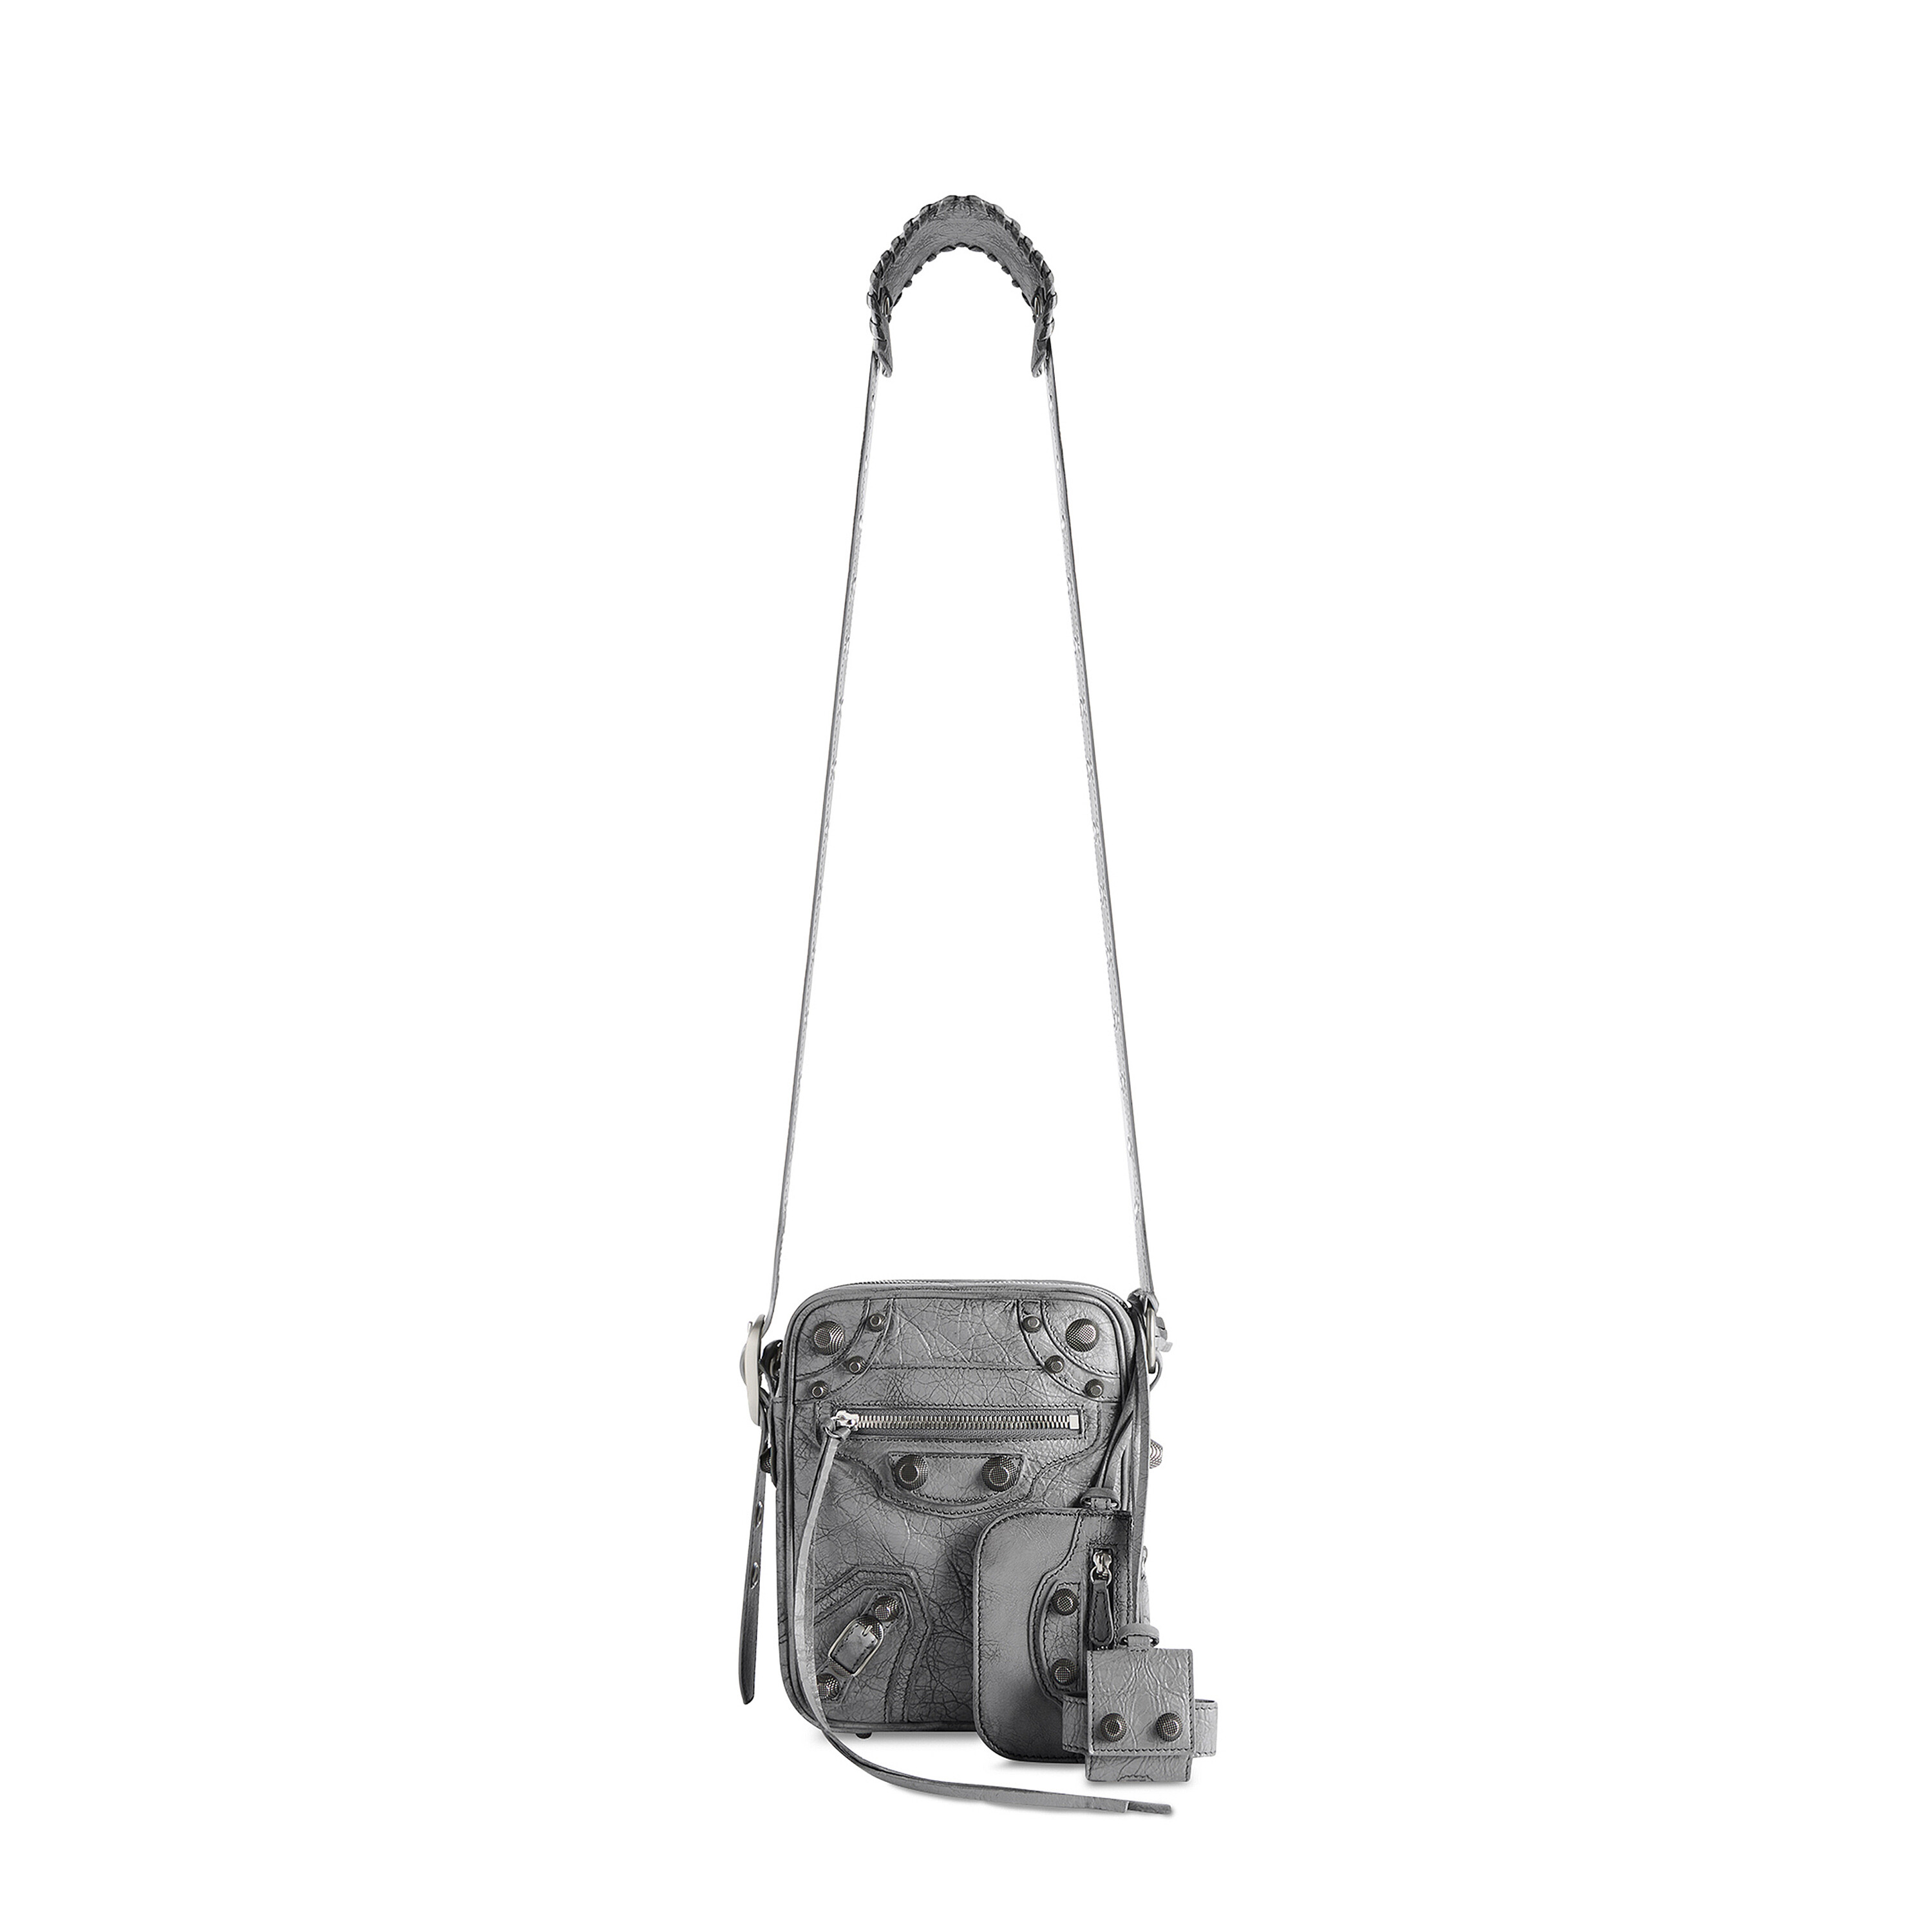 Balenciaga City bag in black aged leather with silver studs  DOWNTOWN  UPTOWN Genève